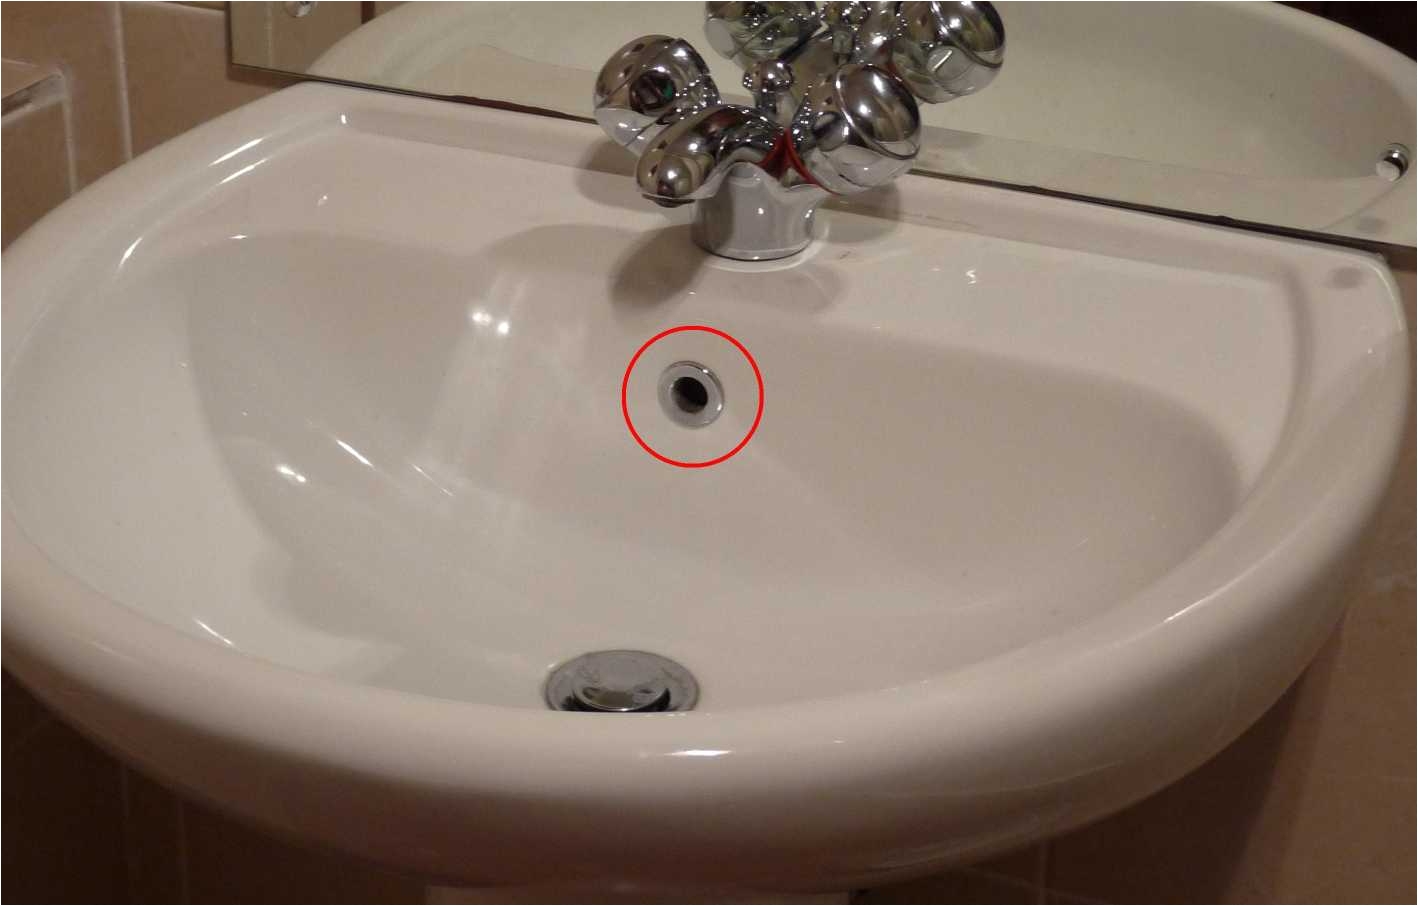 618mwvlhm7l sl1001 h sink how to clean overflow 3x bathroom kitchen of bathroom sink drain stopper